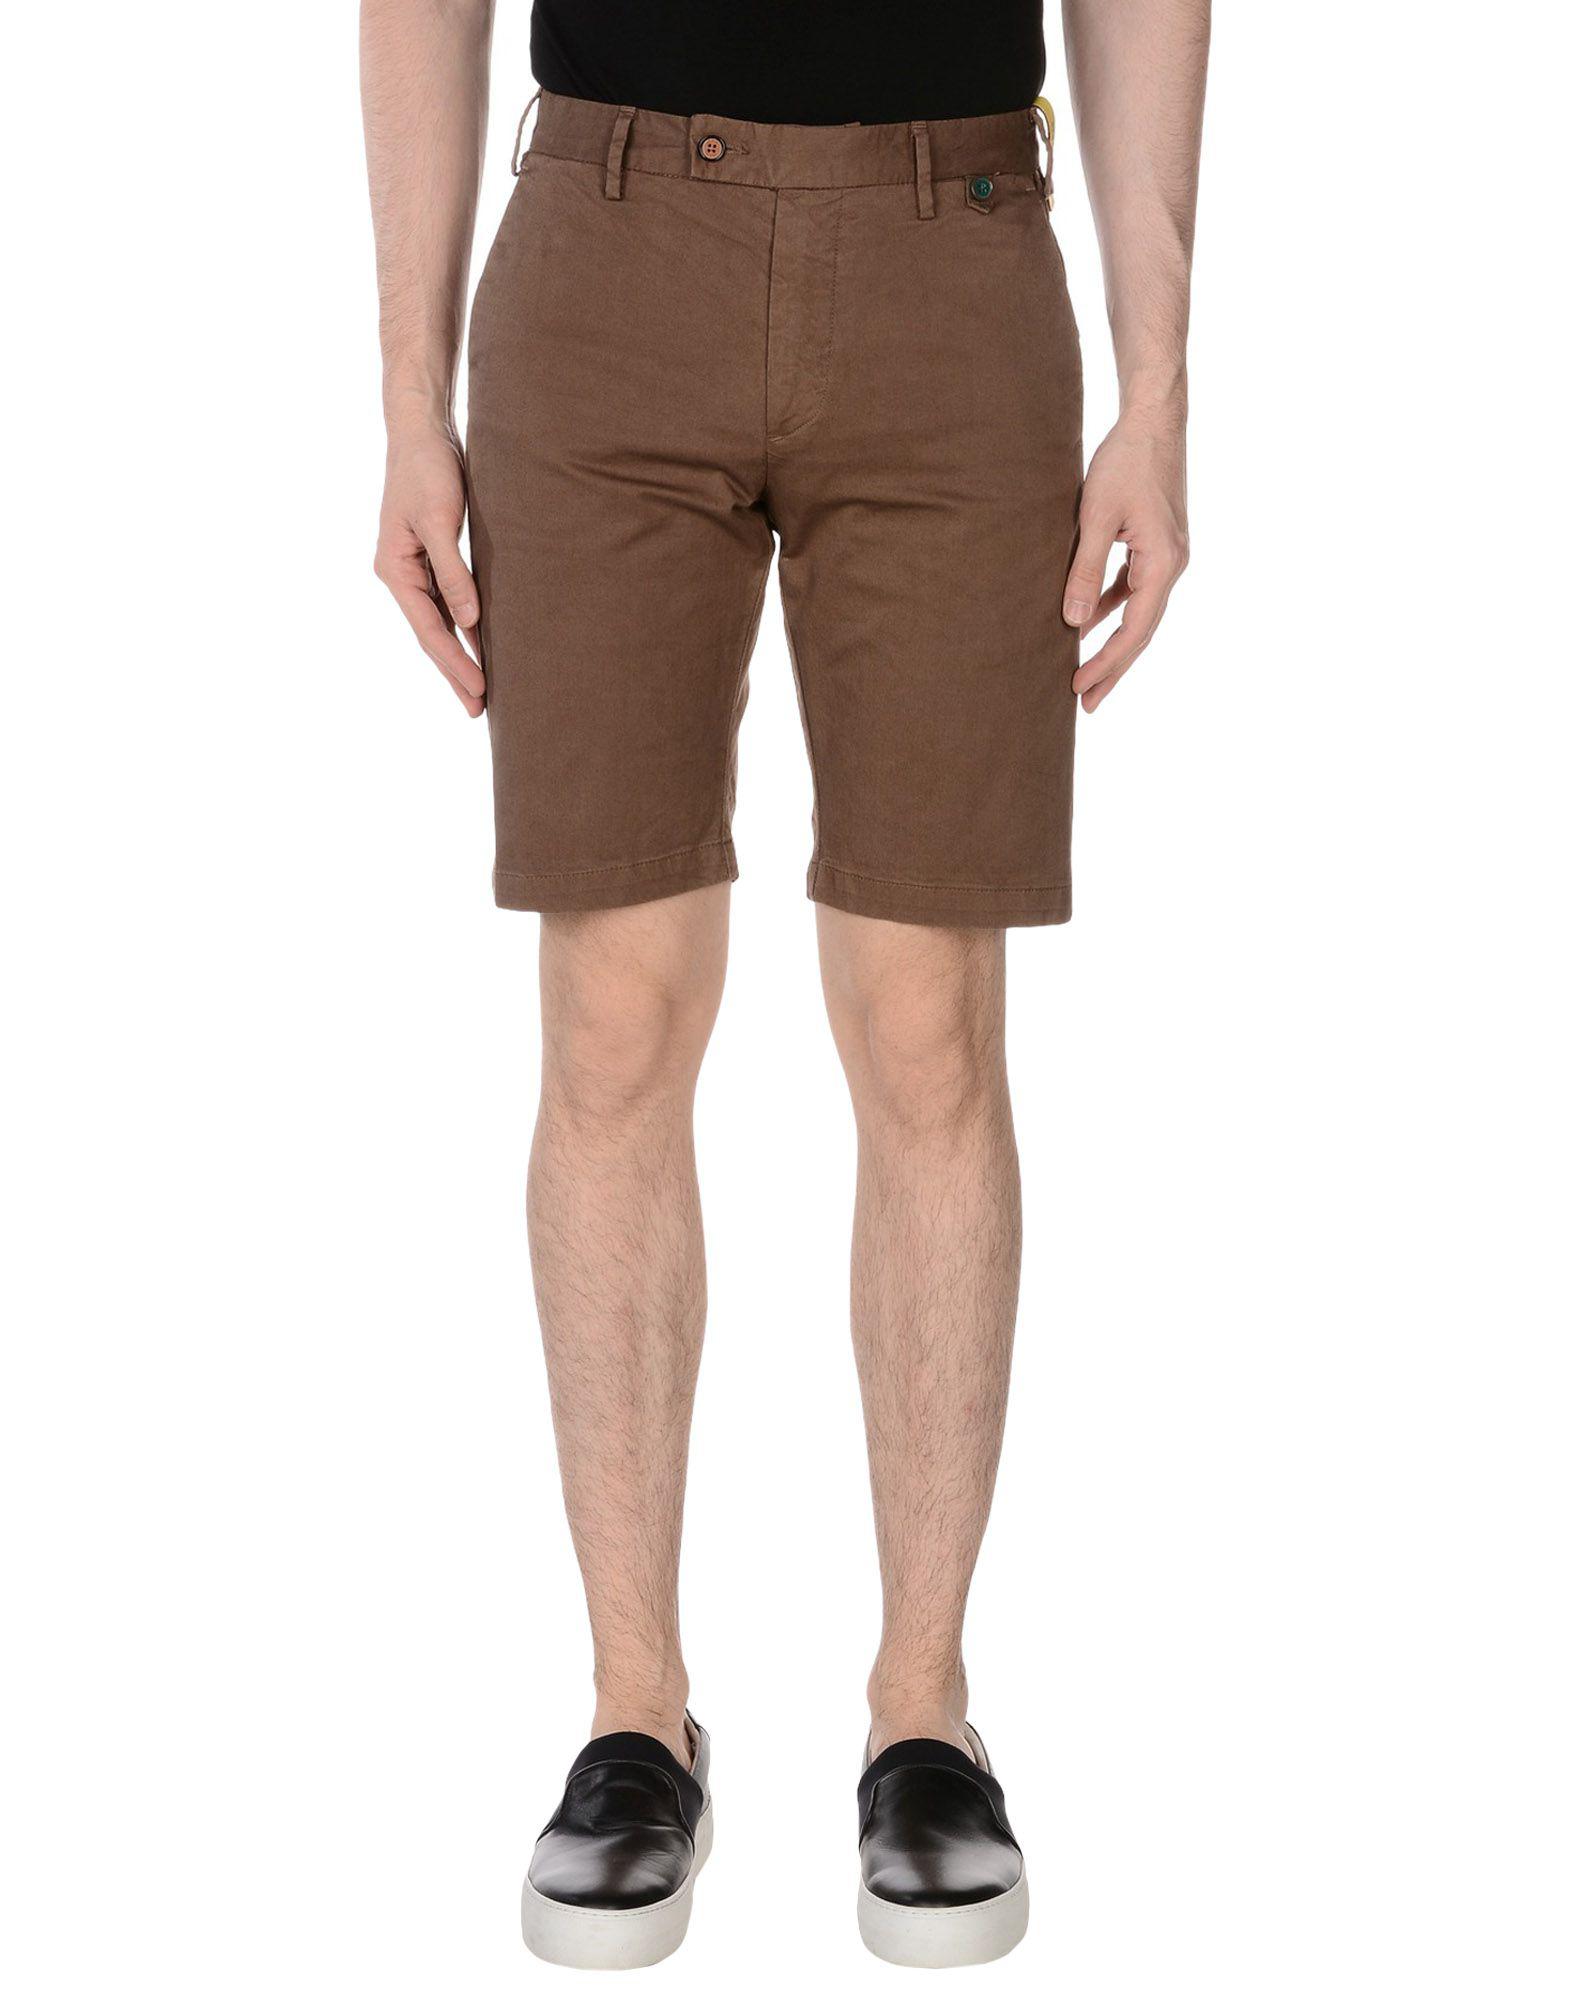 AT.P.CO Cotton Bermuda Shorts in Khaki (Natural) for Men - Lyst